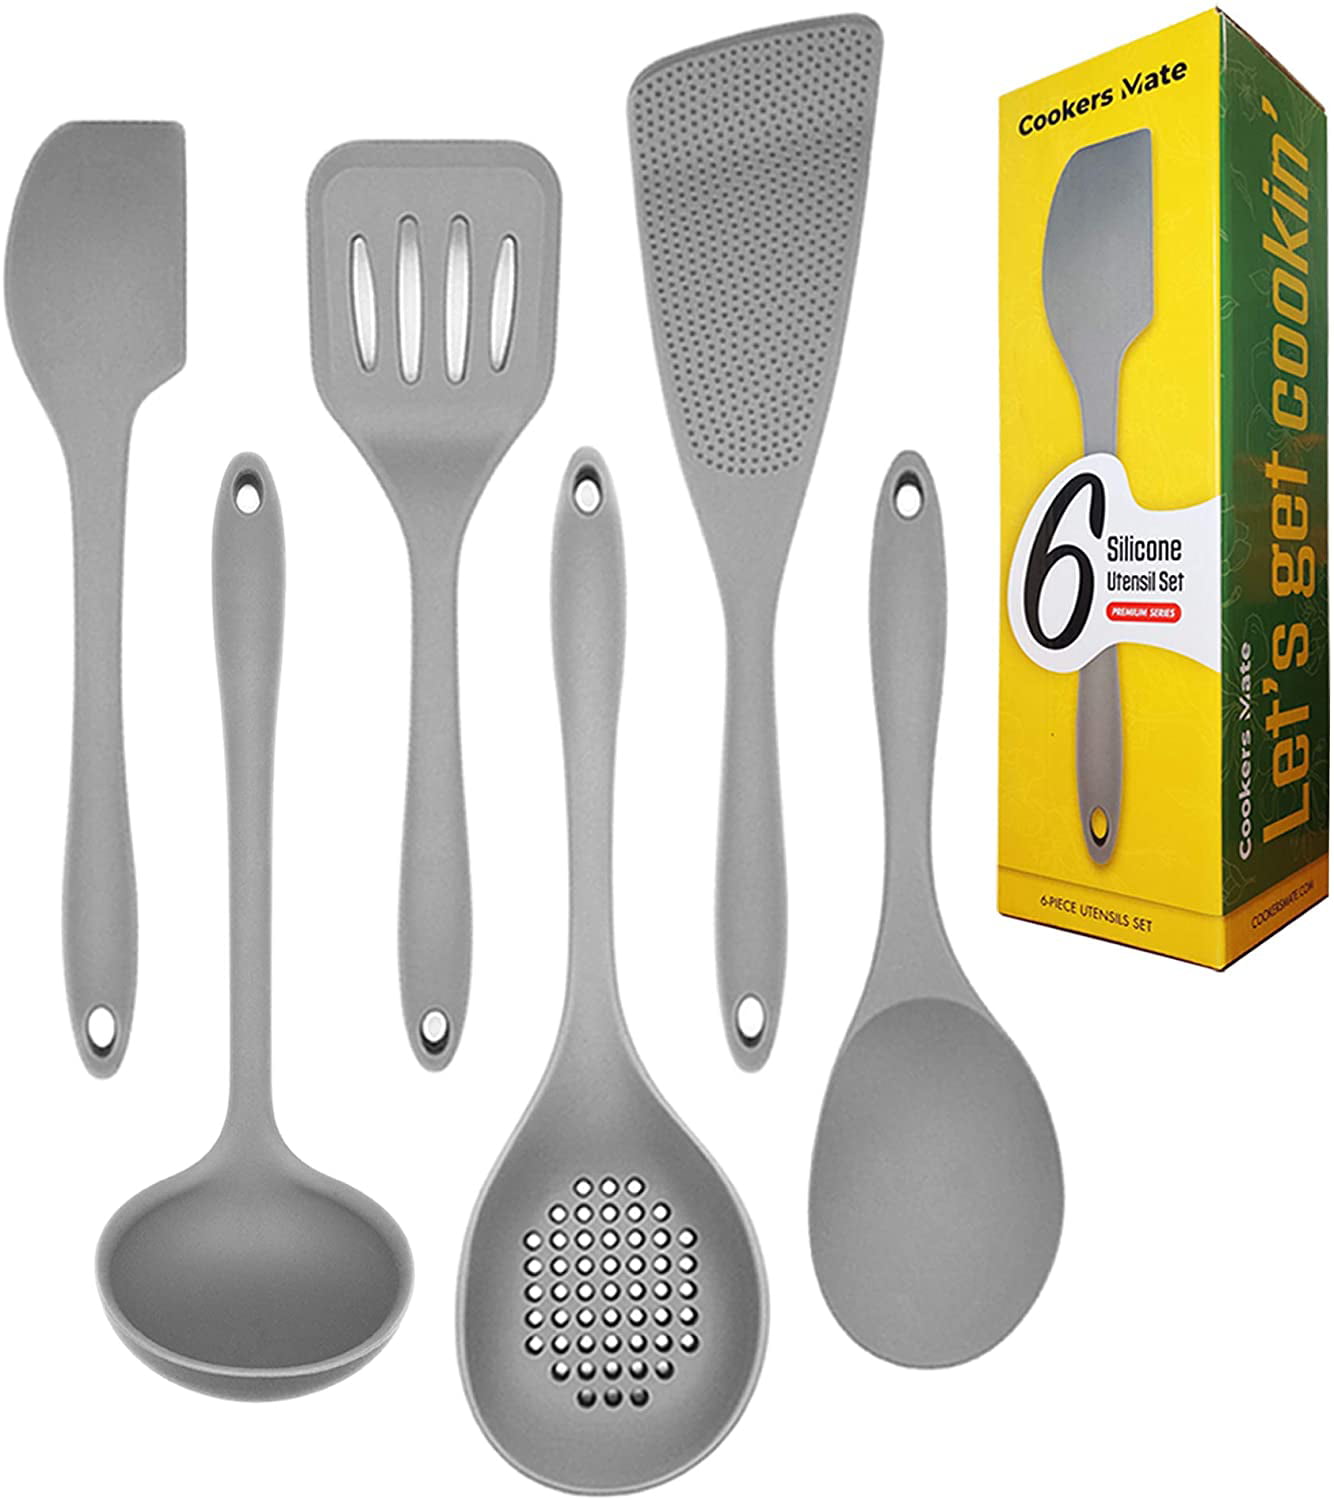 6 Piece Non Stick Silicone Kitchen Spatula Utensils Set Heat Resistant Cooking and Baking Set. 